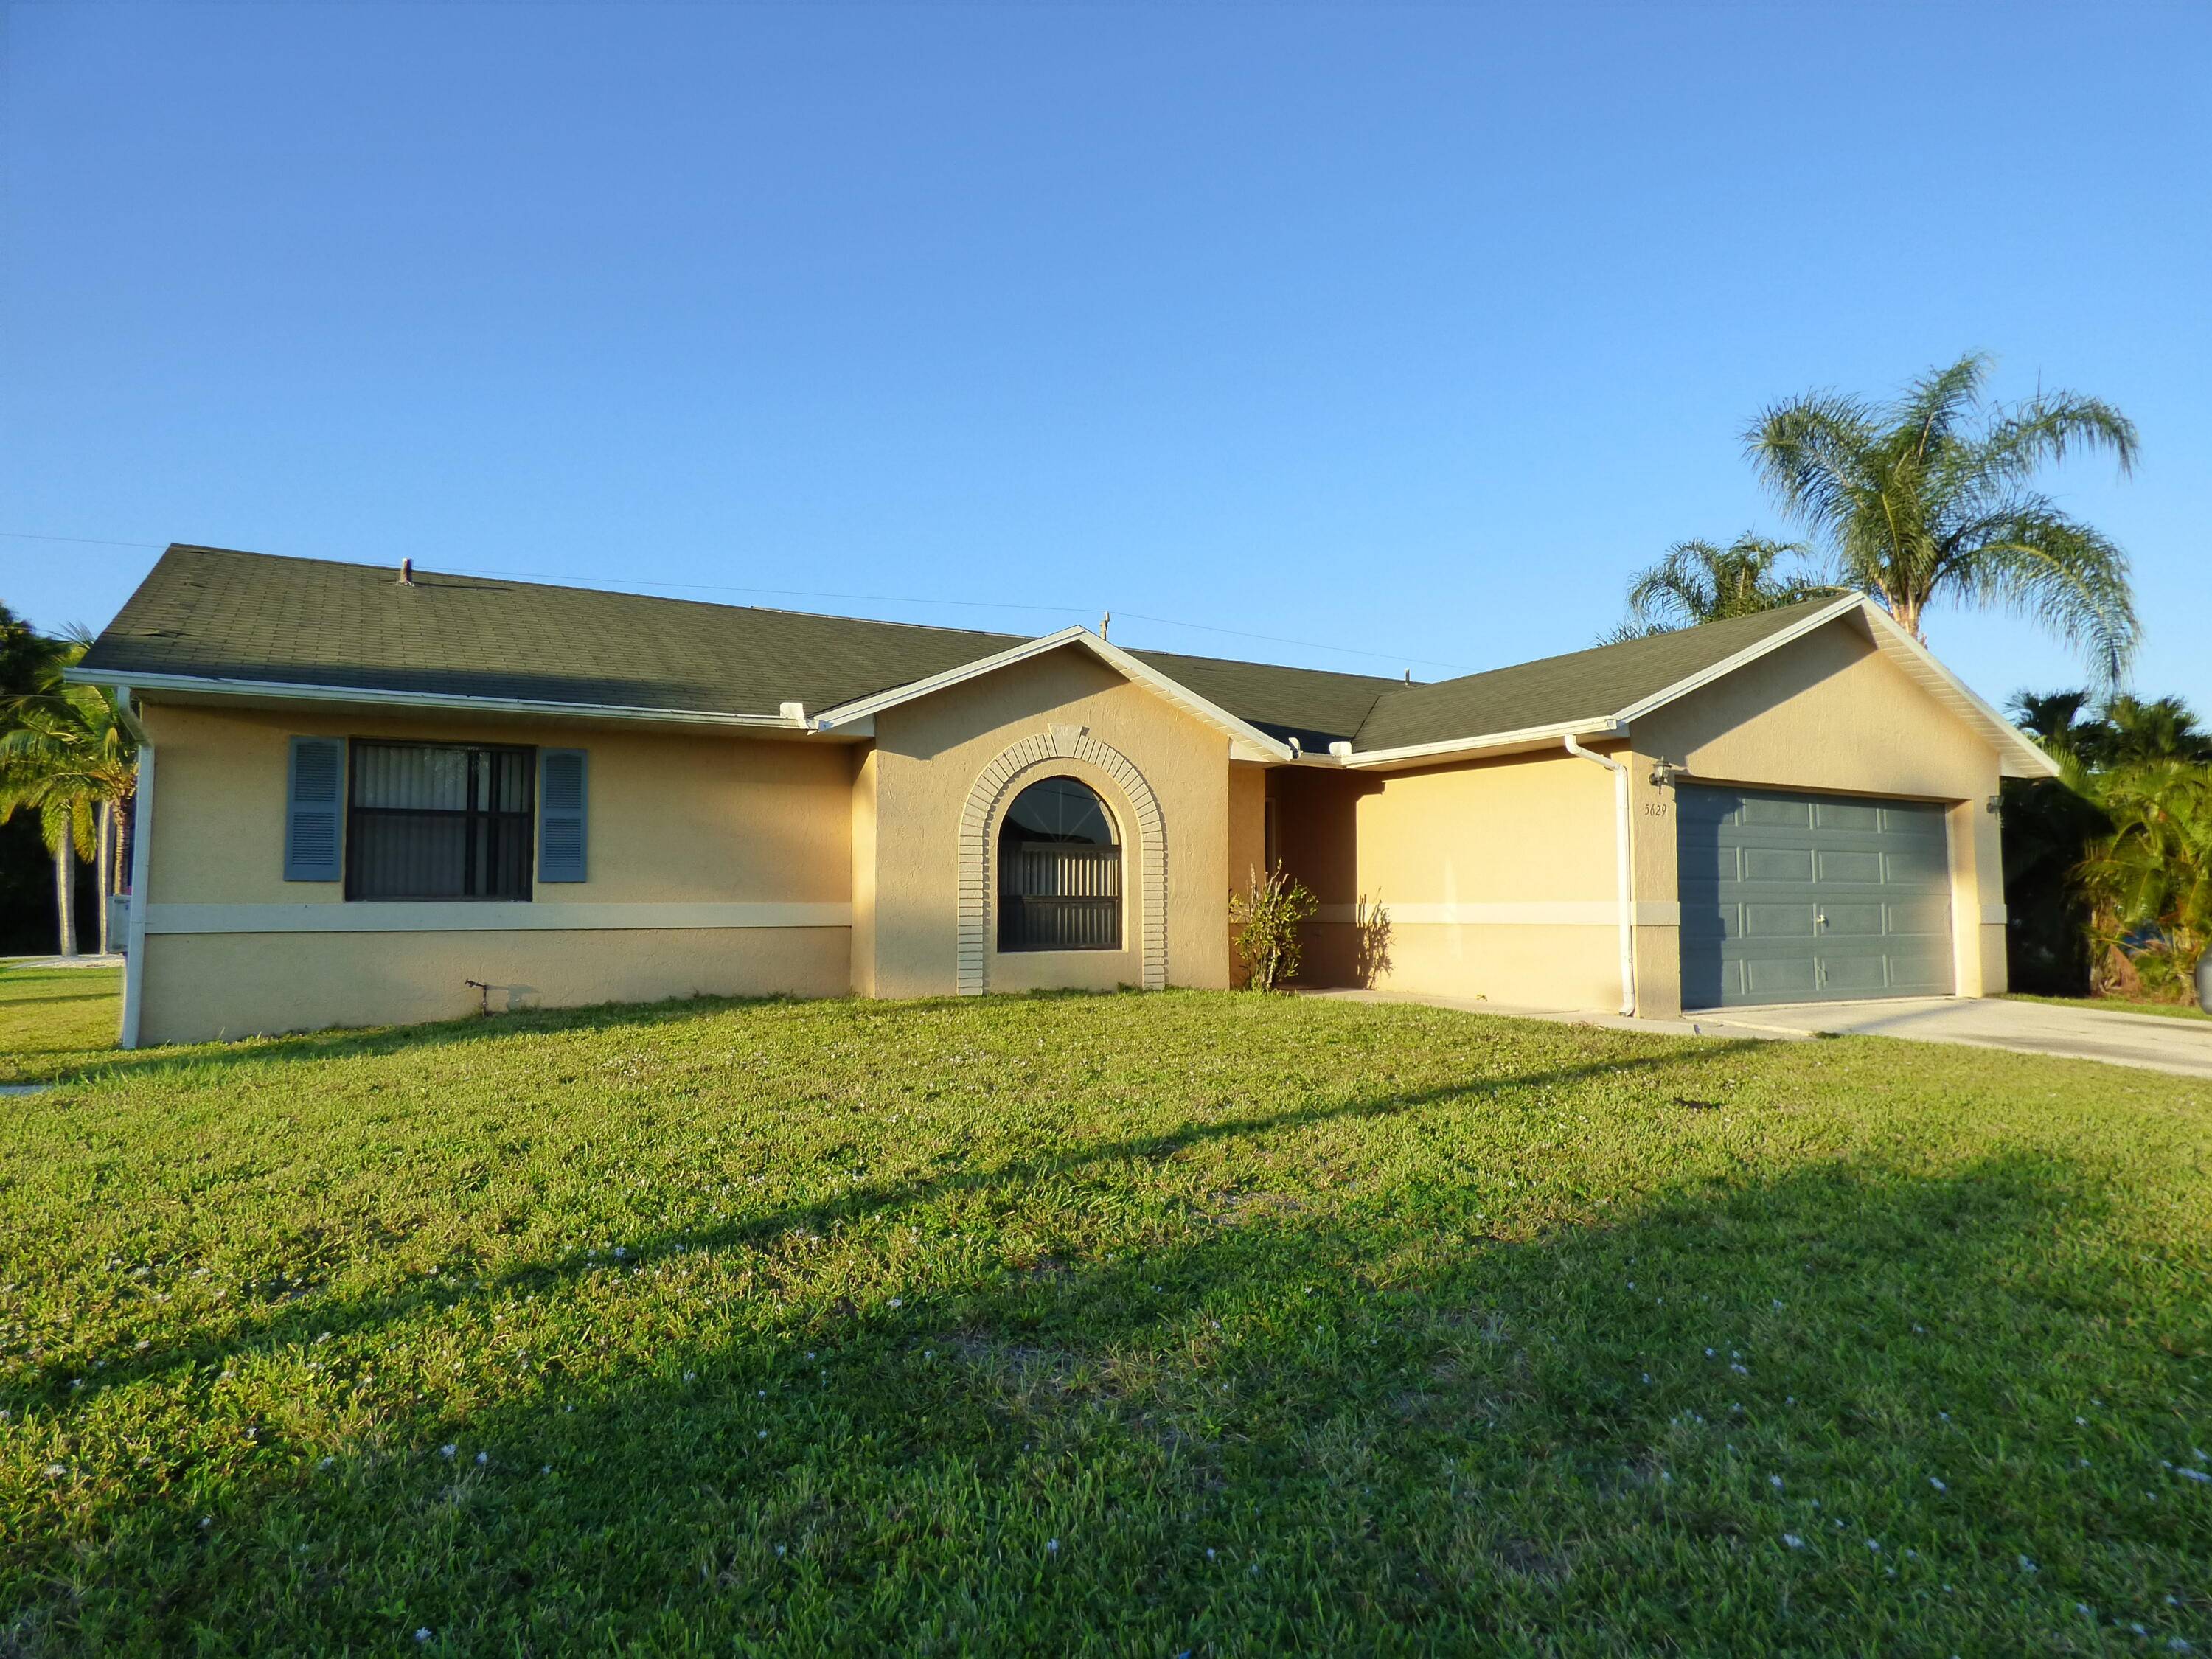 Saint Lucie West Torino Area 3 Bedroom 2 Bath Home 2 Car Garage Spacious Corner Lot Newly Renovated, Tile Floor Throughout, Screened Lanai.